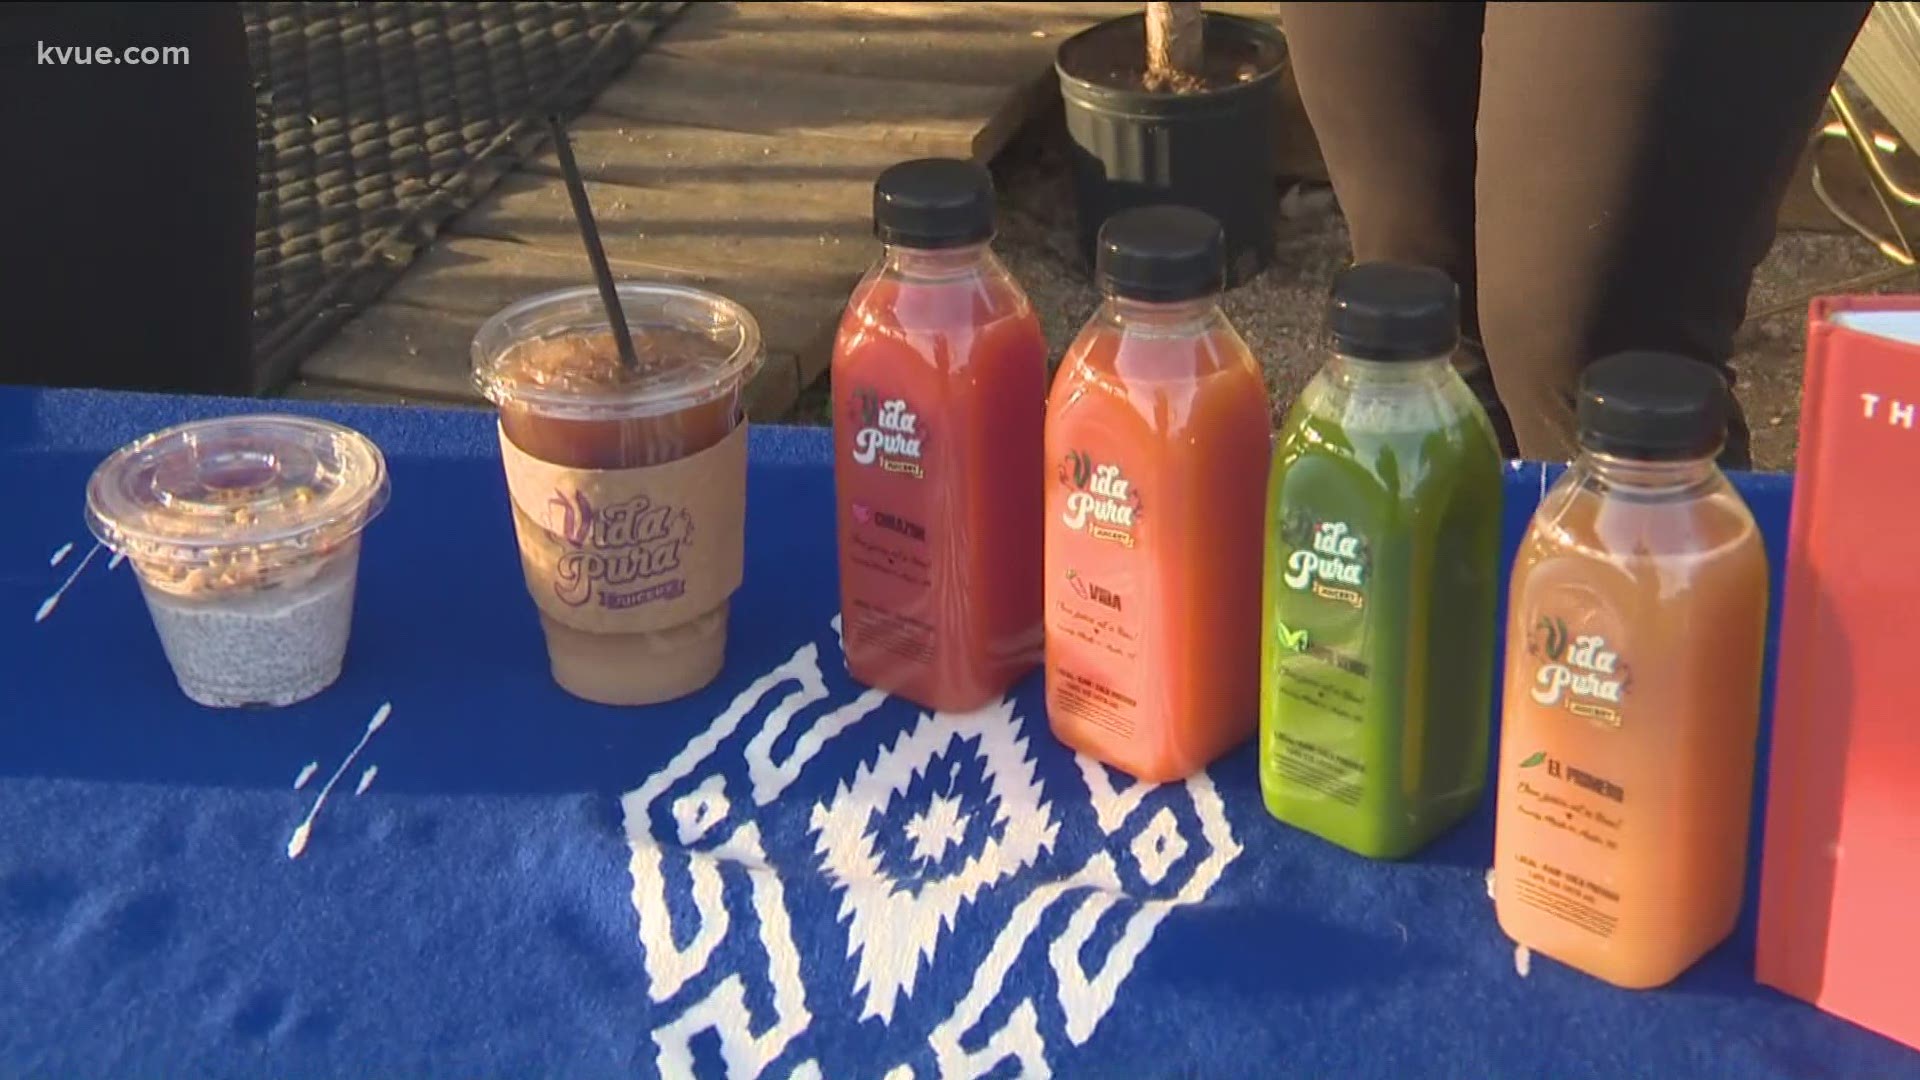 For Keep Austin Local this week, we dropped by Vida Pura Juicery on Manor Road.